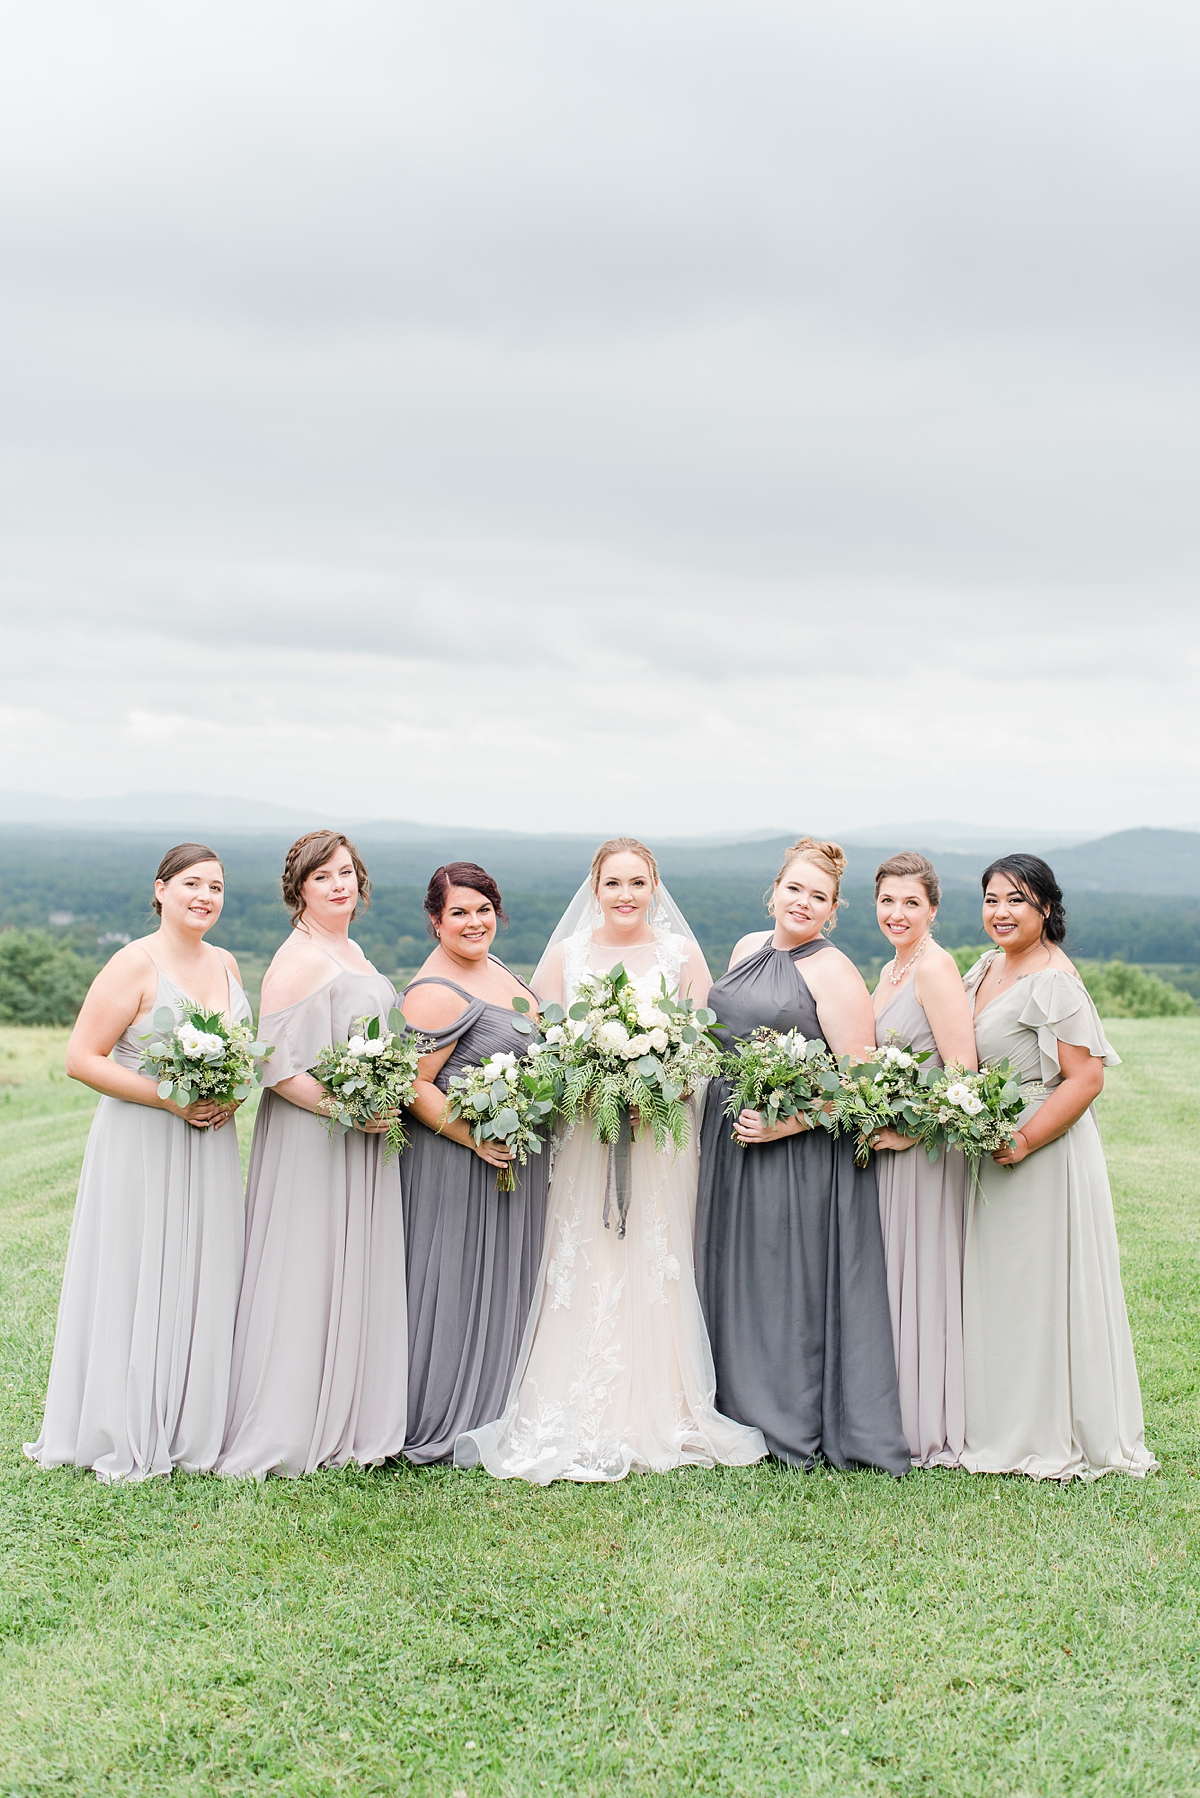 Bridal Party Portraits at a Timeless Grace Estate Winery Wedding. Wedding Photography by Richmond Wedding Photographer Kailey Brianne Photography.